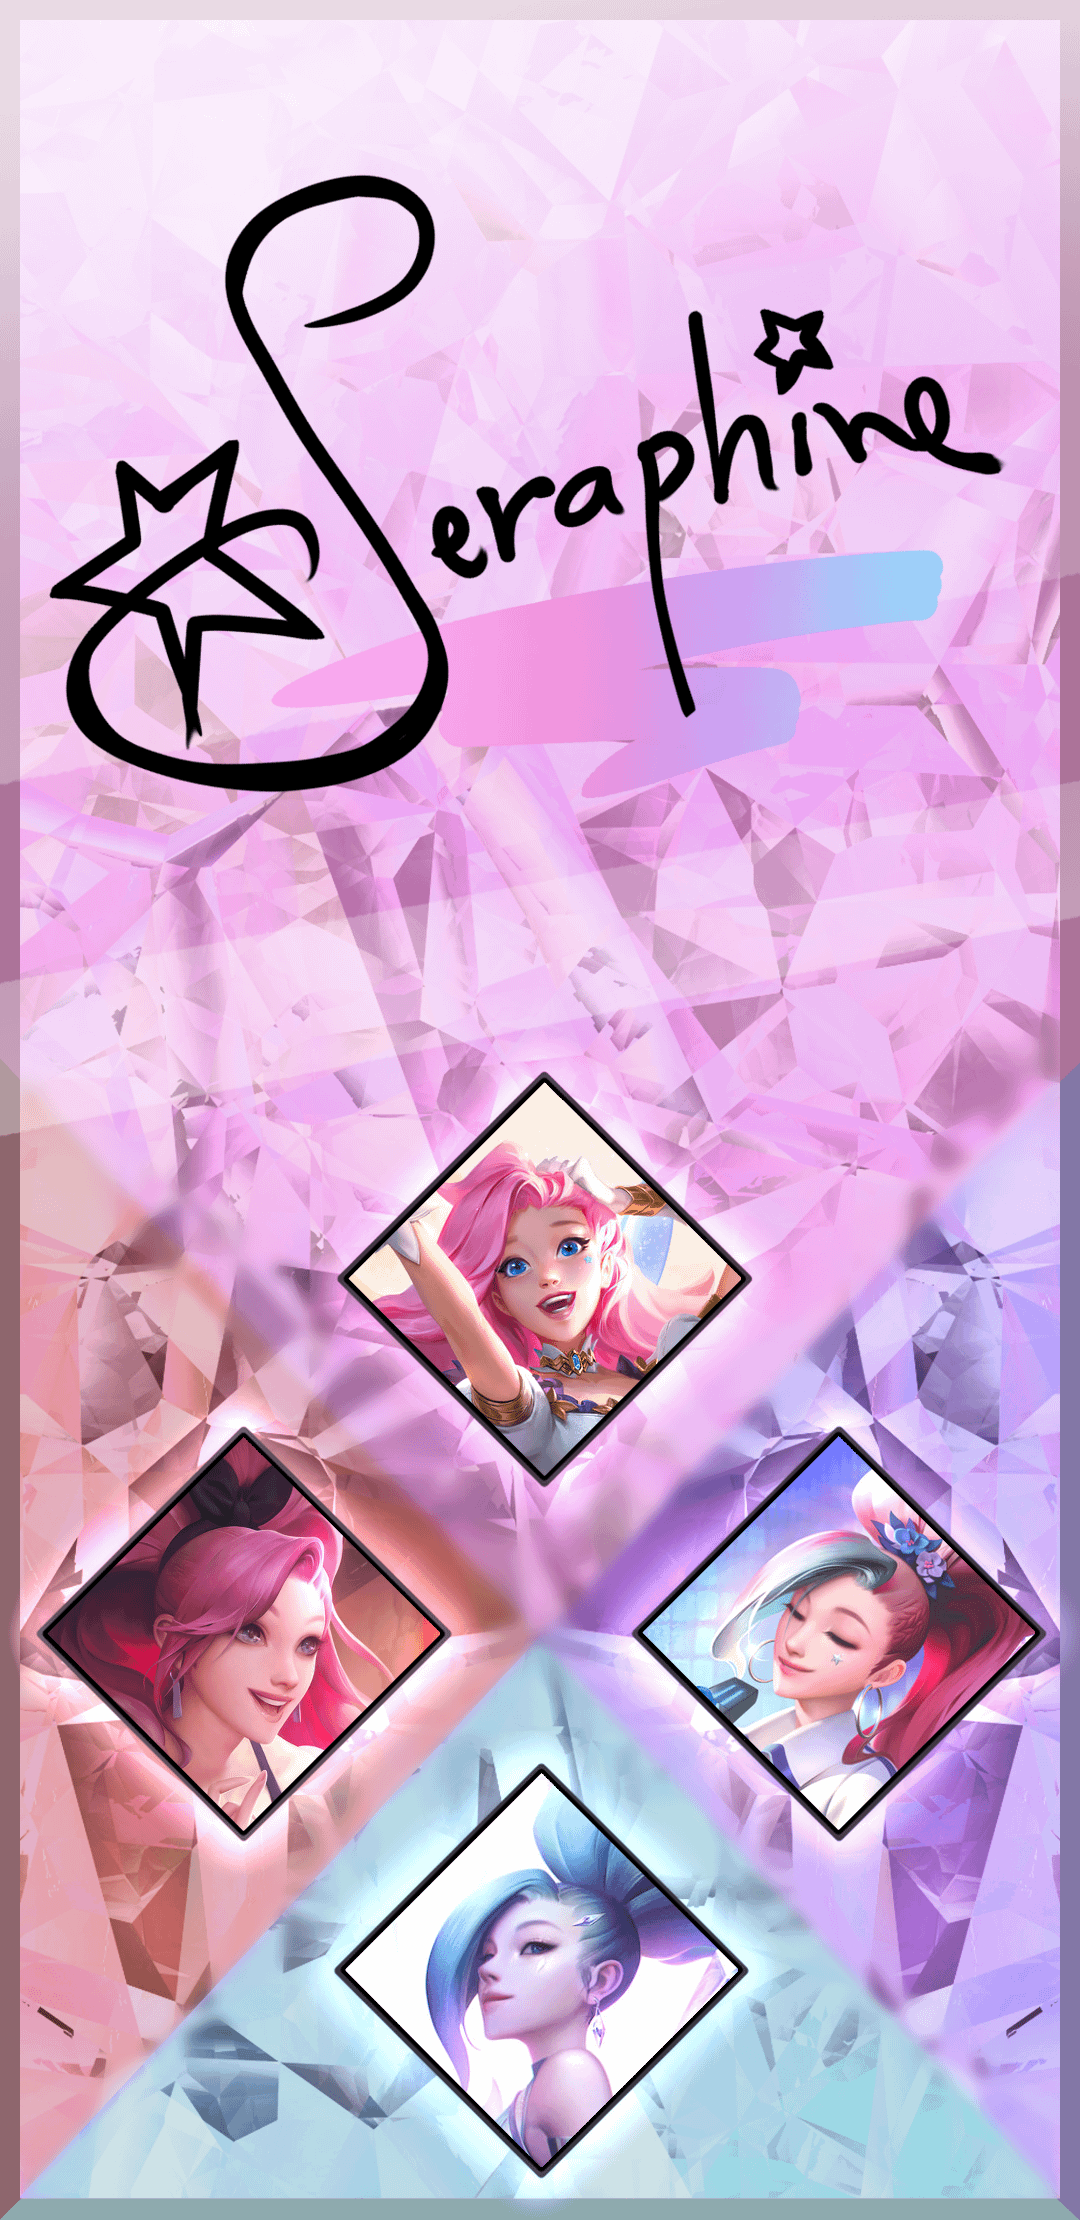 Seraphine Wallpaper I Made For My Phone Let Me Know If You Want Me To Make More - Aespa